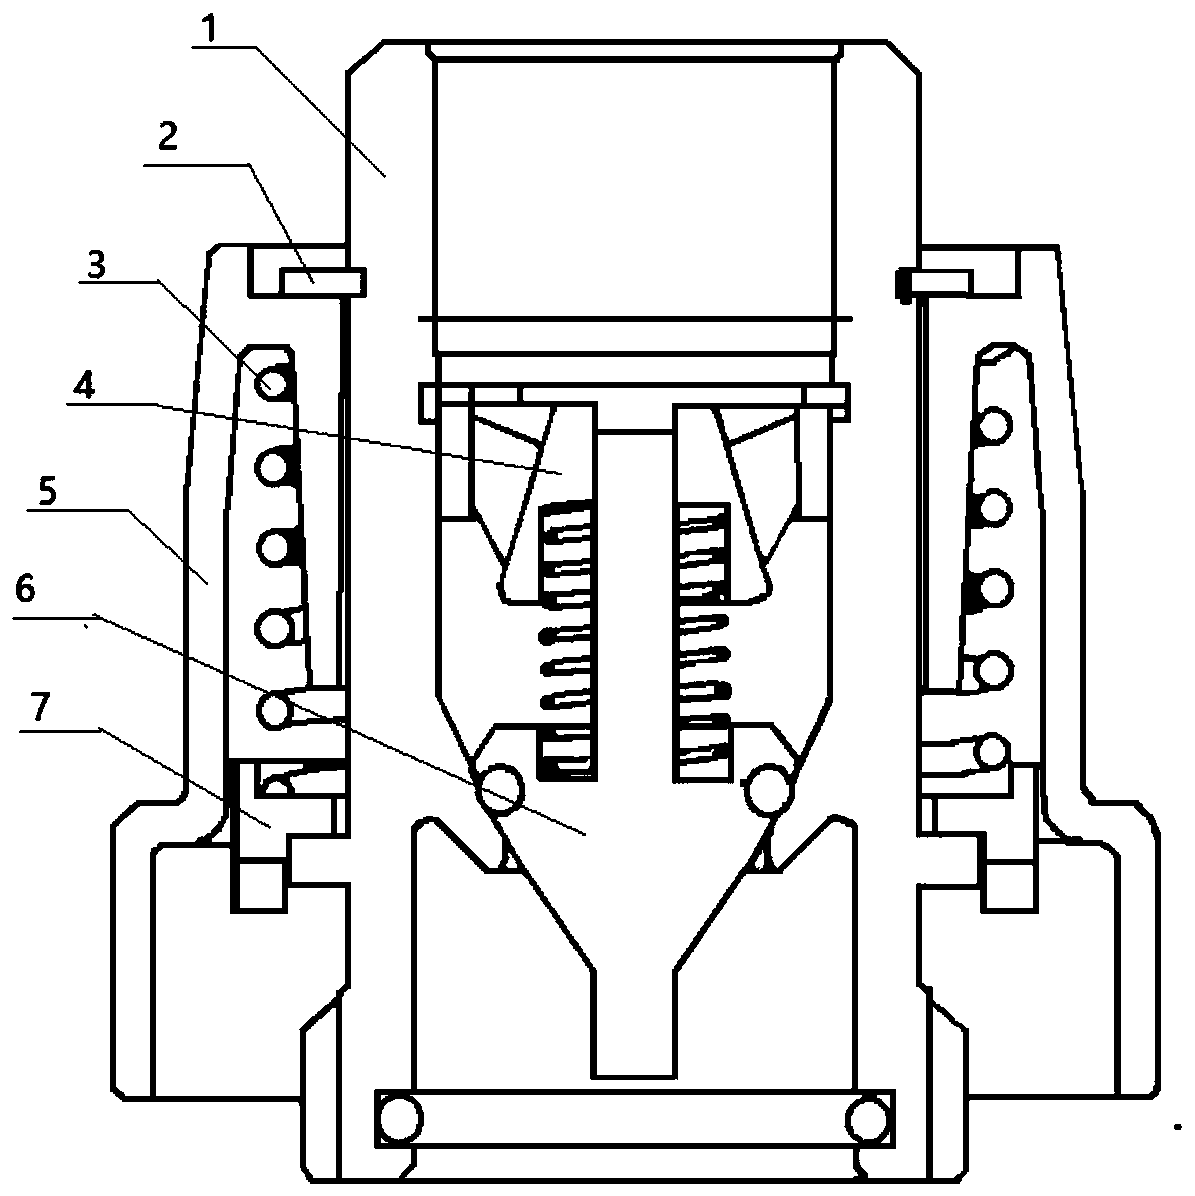 Pulling-out valve